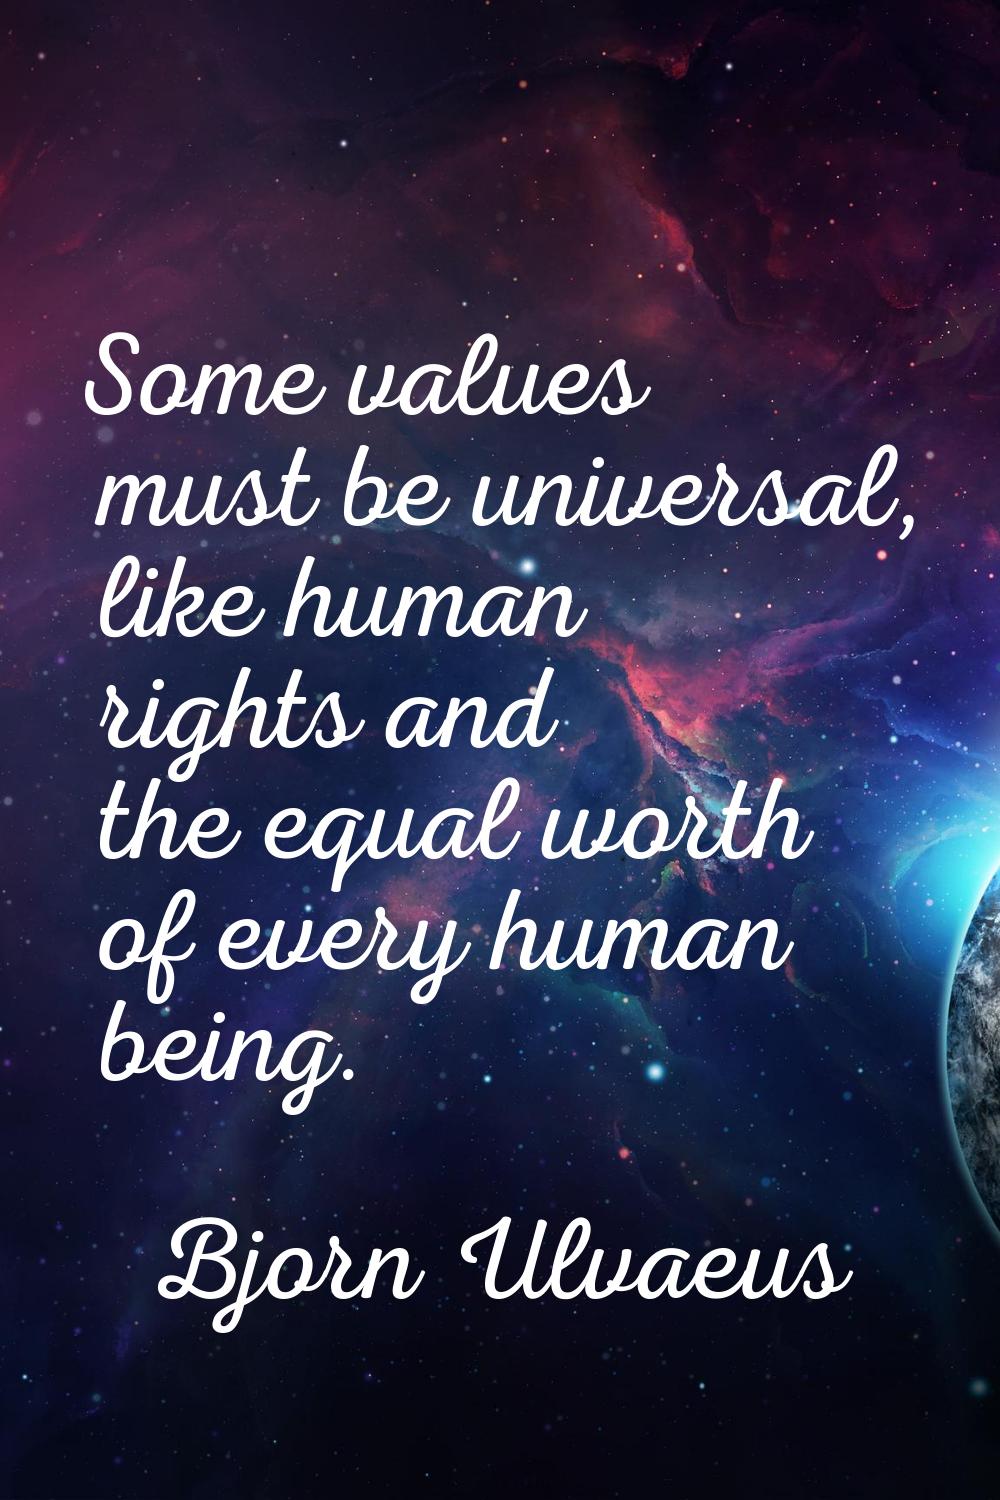 Some values must be universal, like human rights and the equal worth of every human being.